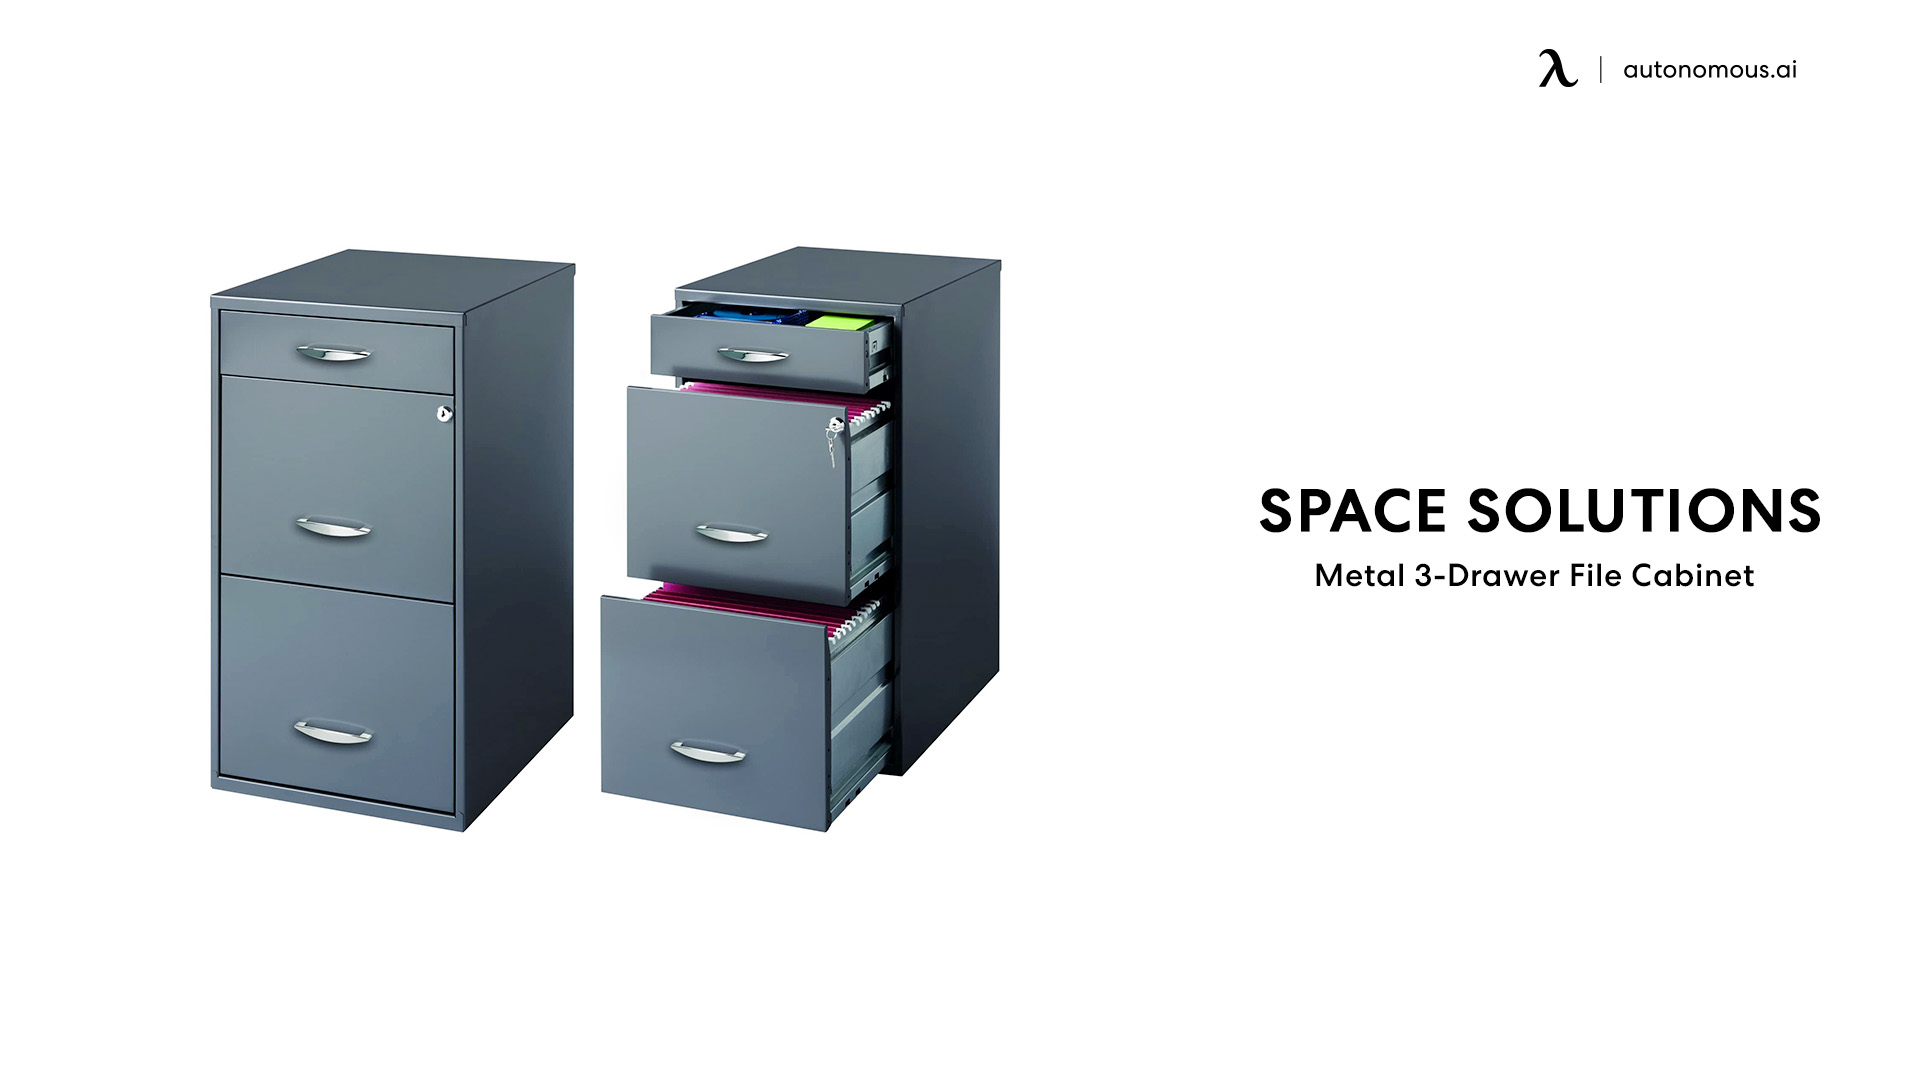 Space Solutions Metal 3-Drawer File Cabinet